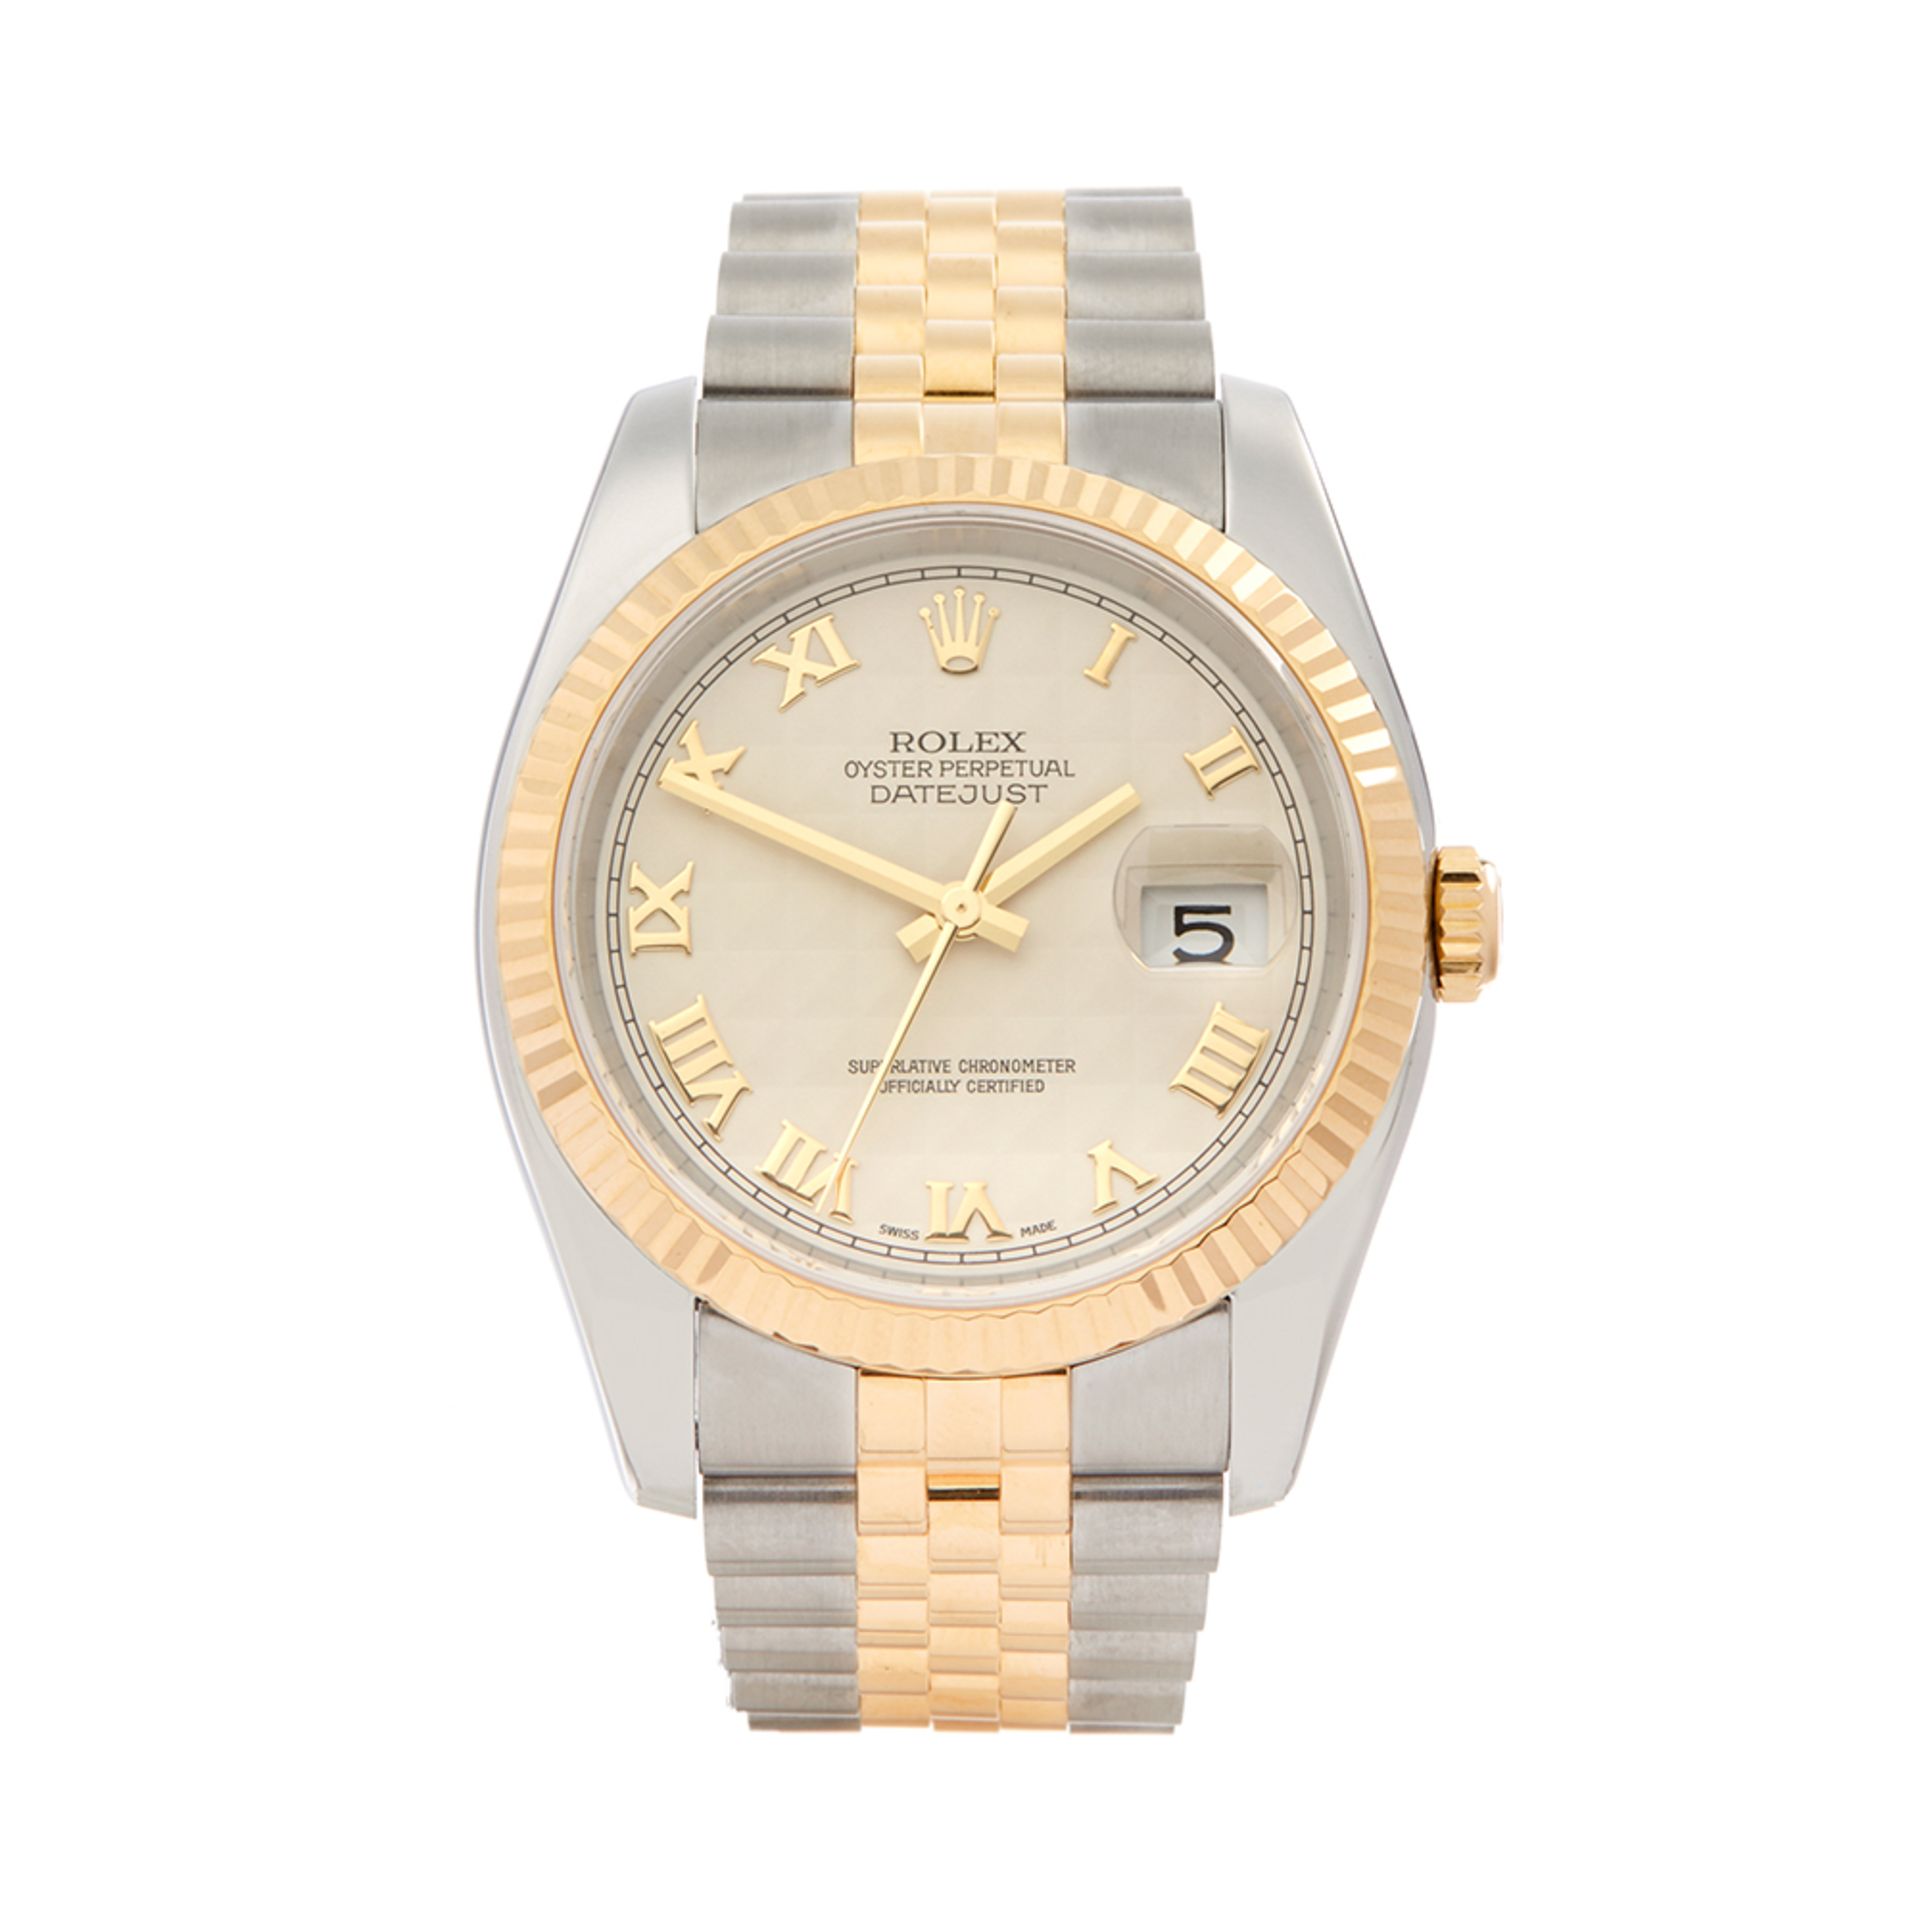 2016 Rolex DateJust 36 18k Stainless Steel & Yellow Gold - 116233 - Image 8 of 8